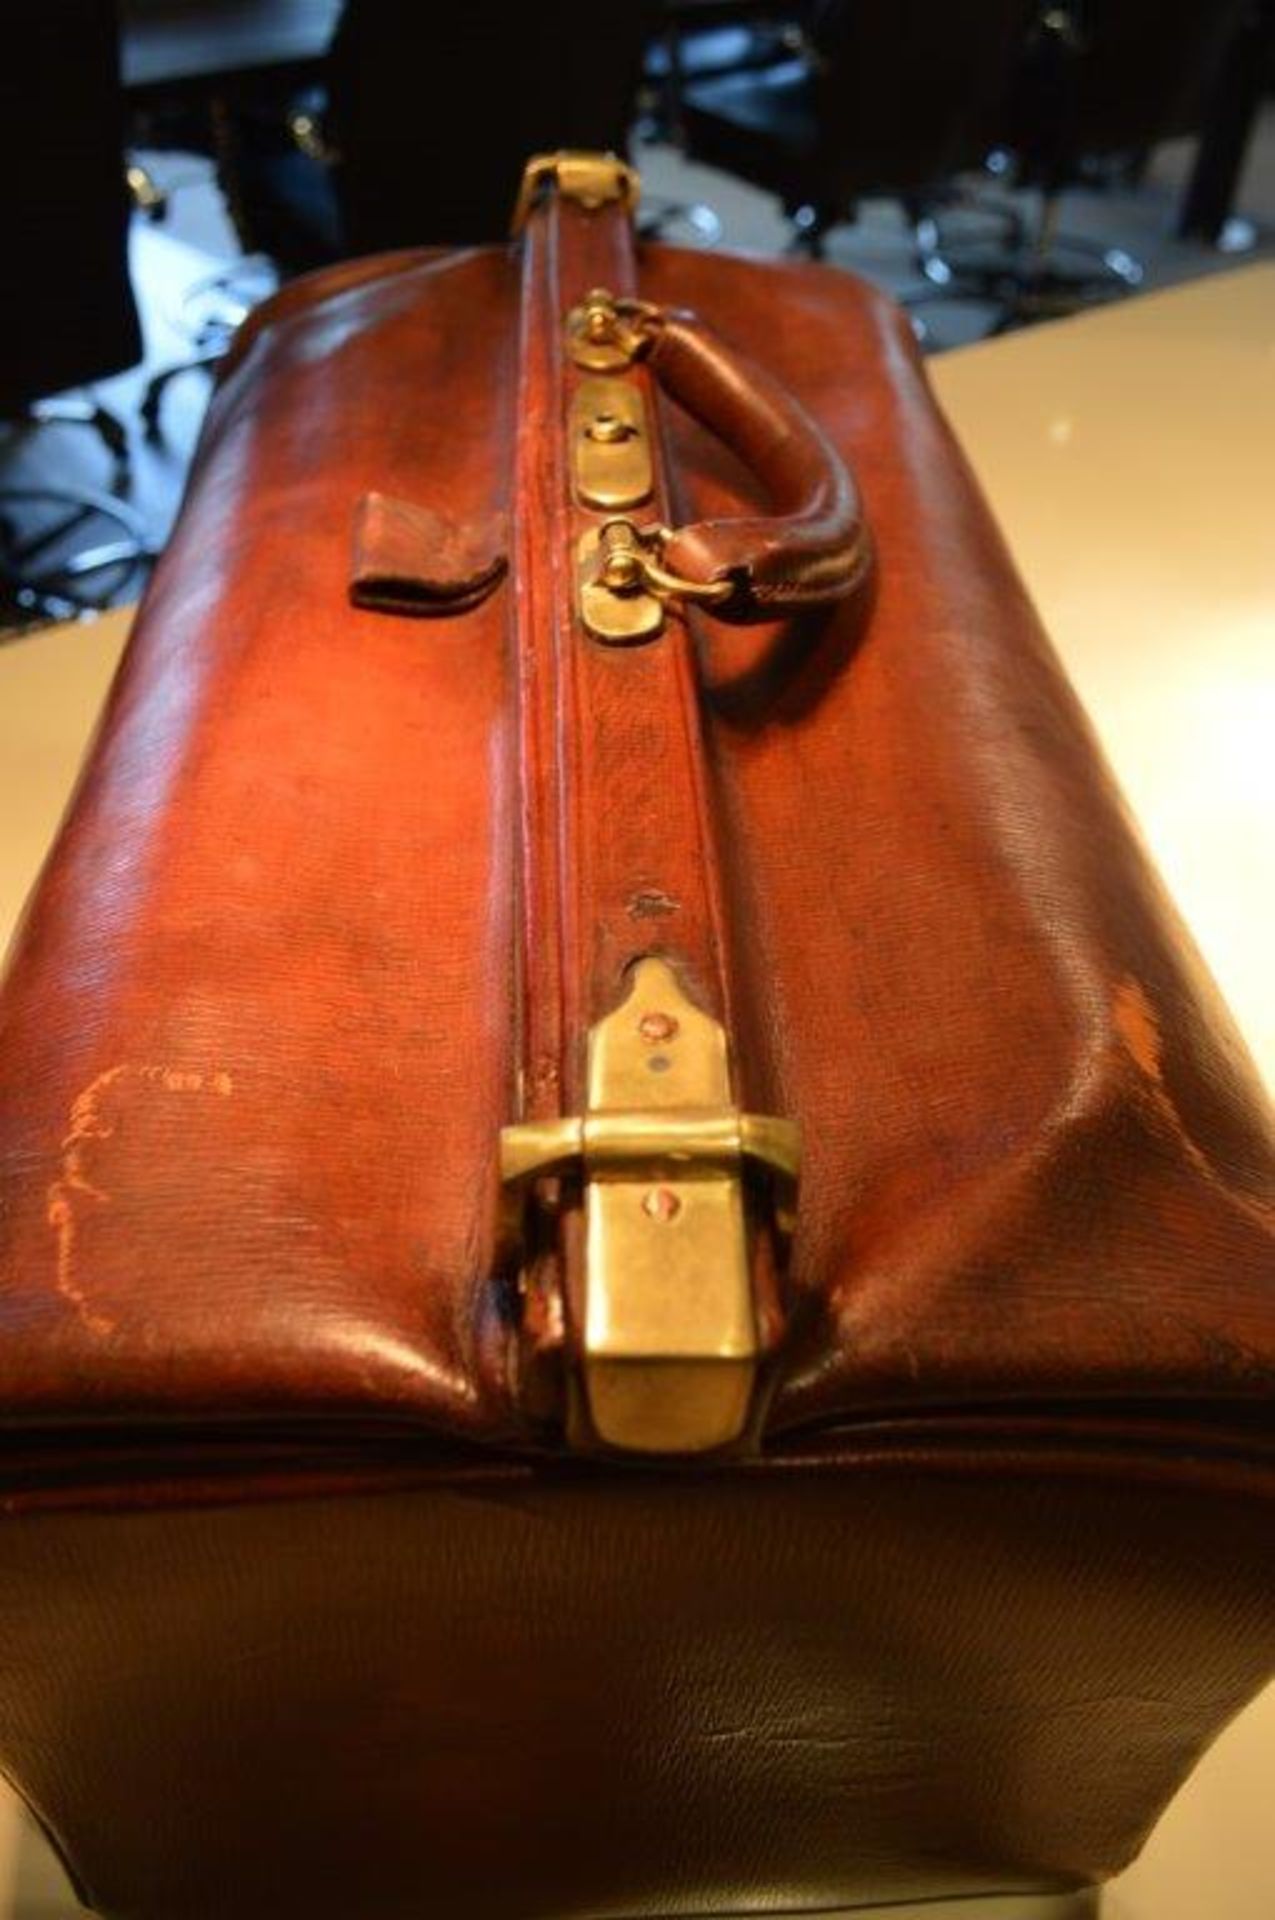 A simply stunning vintage brown leather travel / flight bag.
Believed to be dated in the 1950's - Image 3 of 6